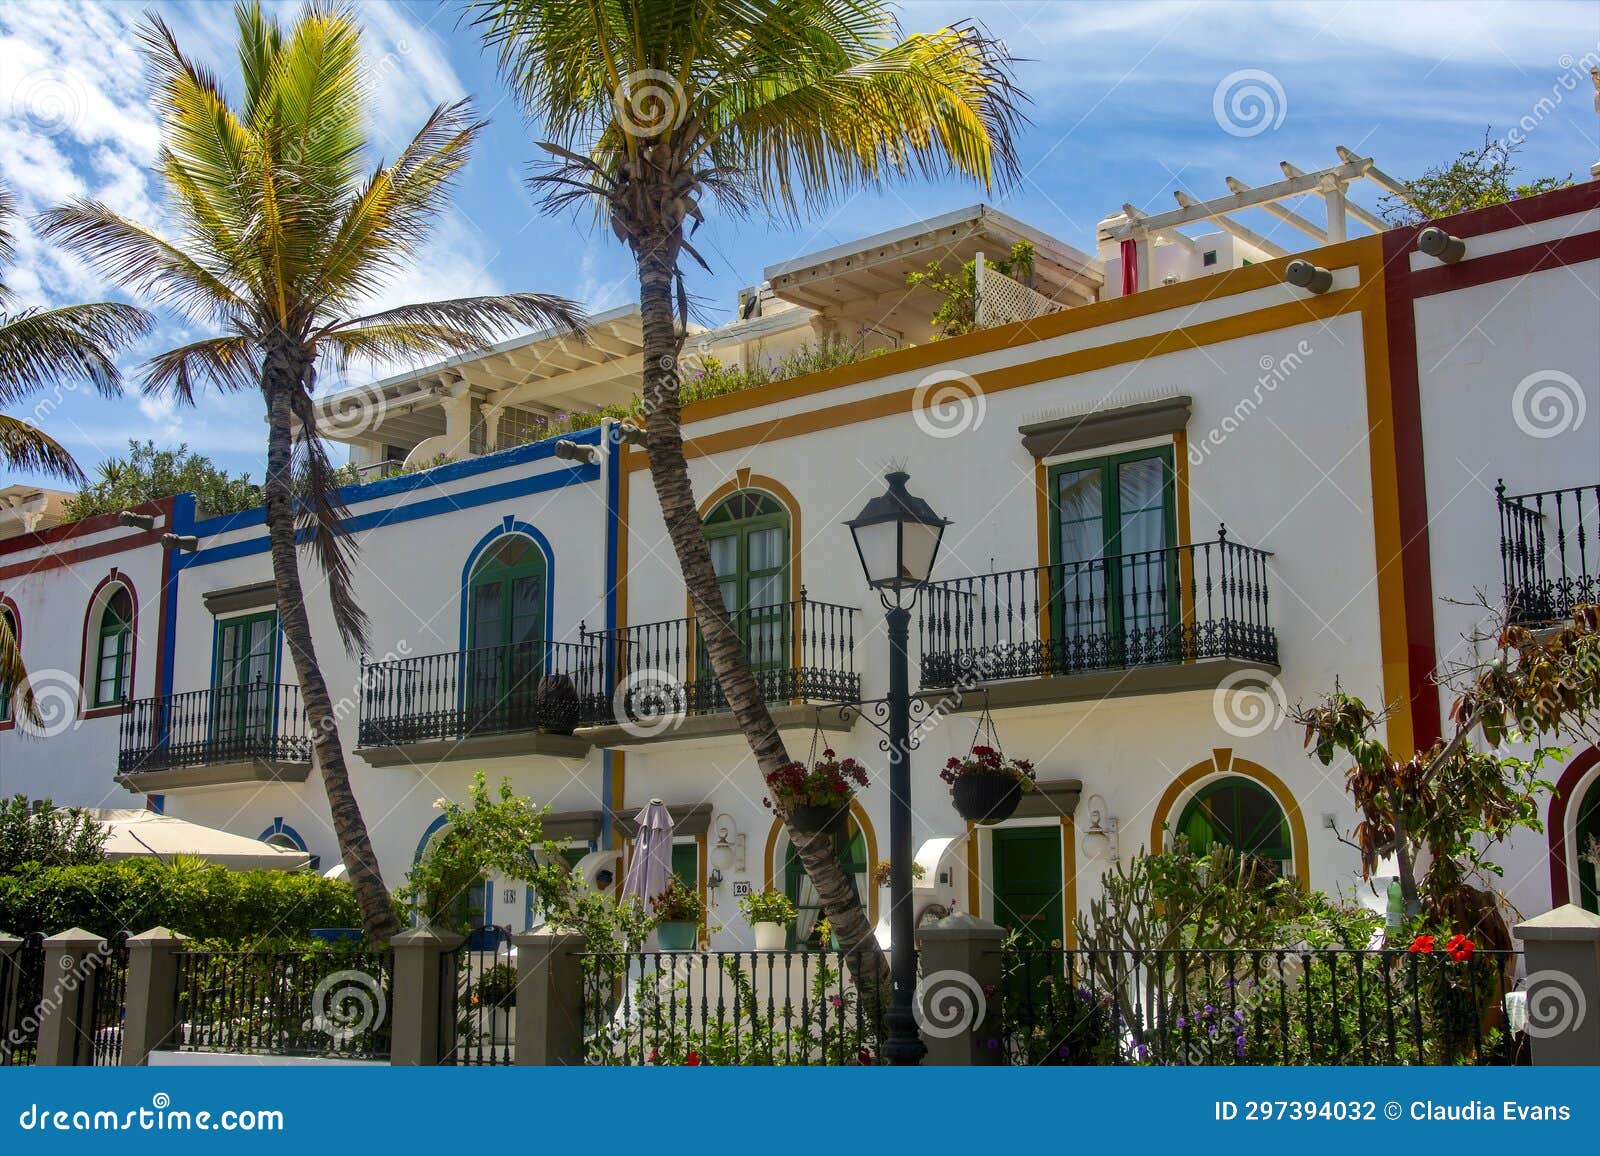 houses and palm trees in the spanish town of puerto de mogan